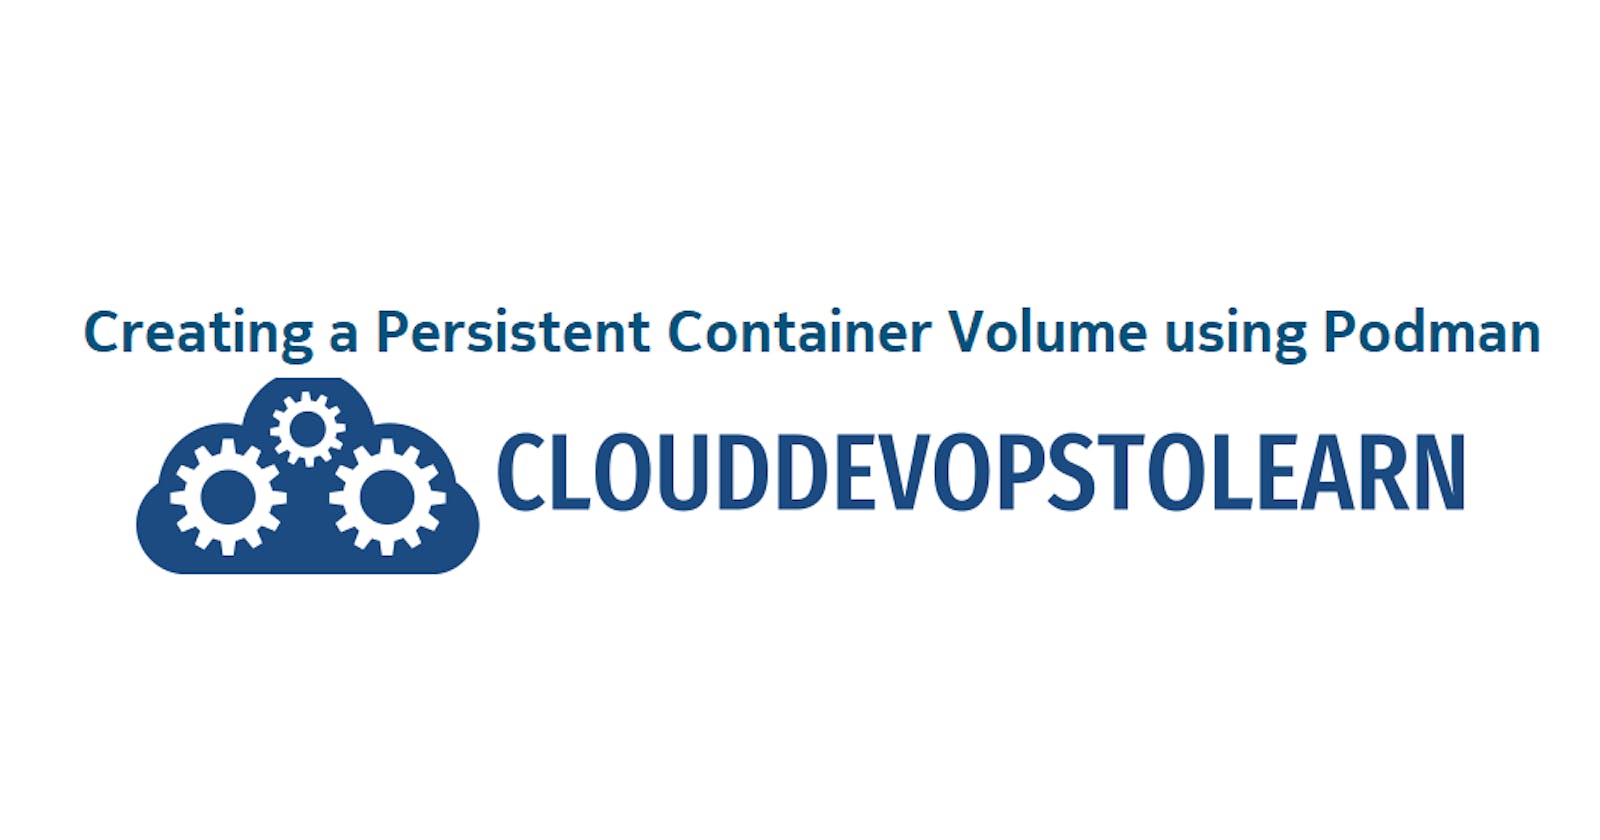 OpenShift Hands-On Lab - Creating a Persistent Container Volume using Podman